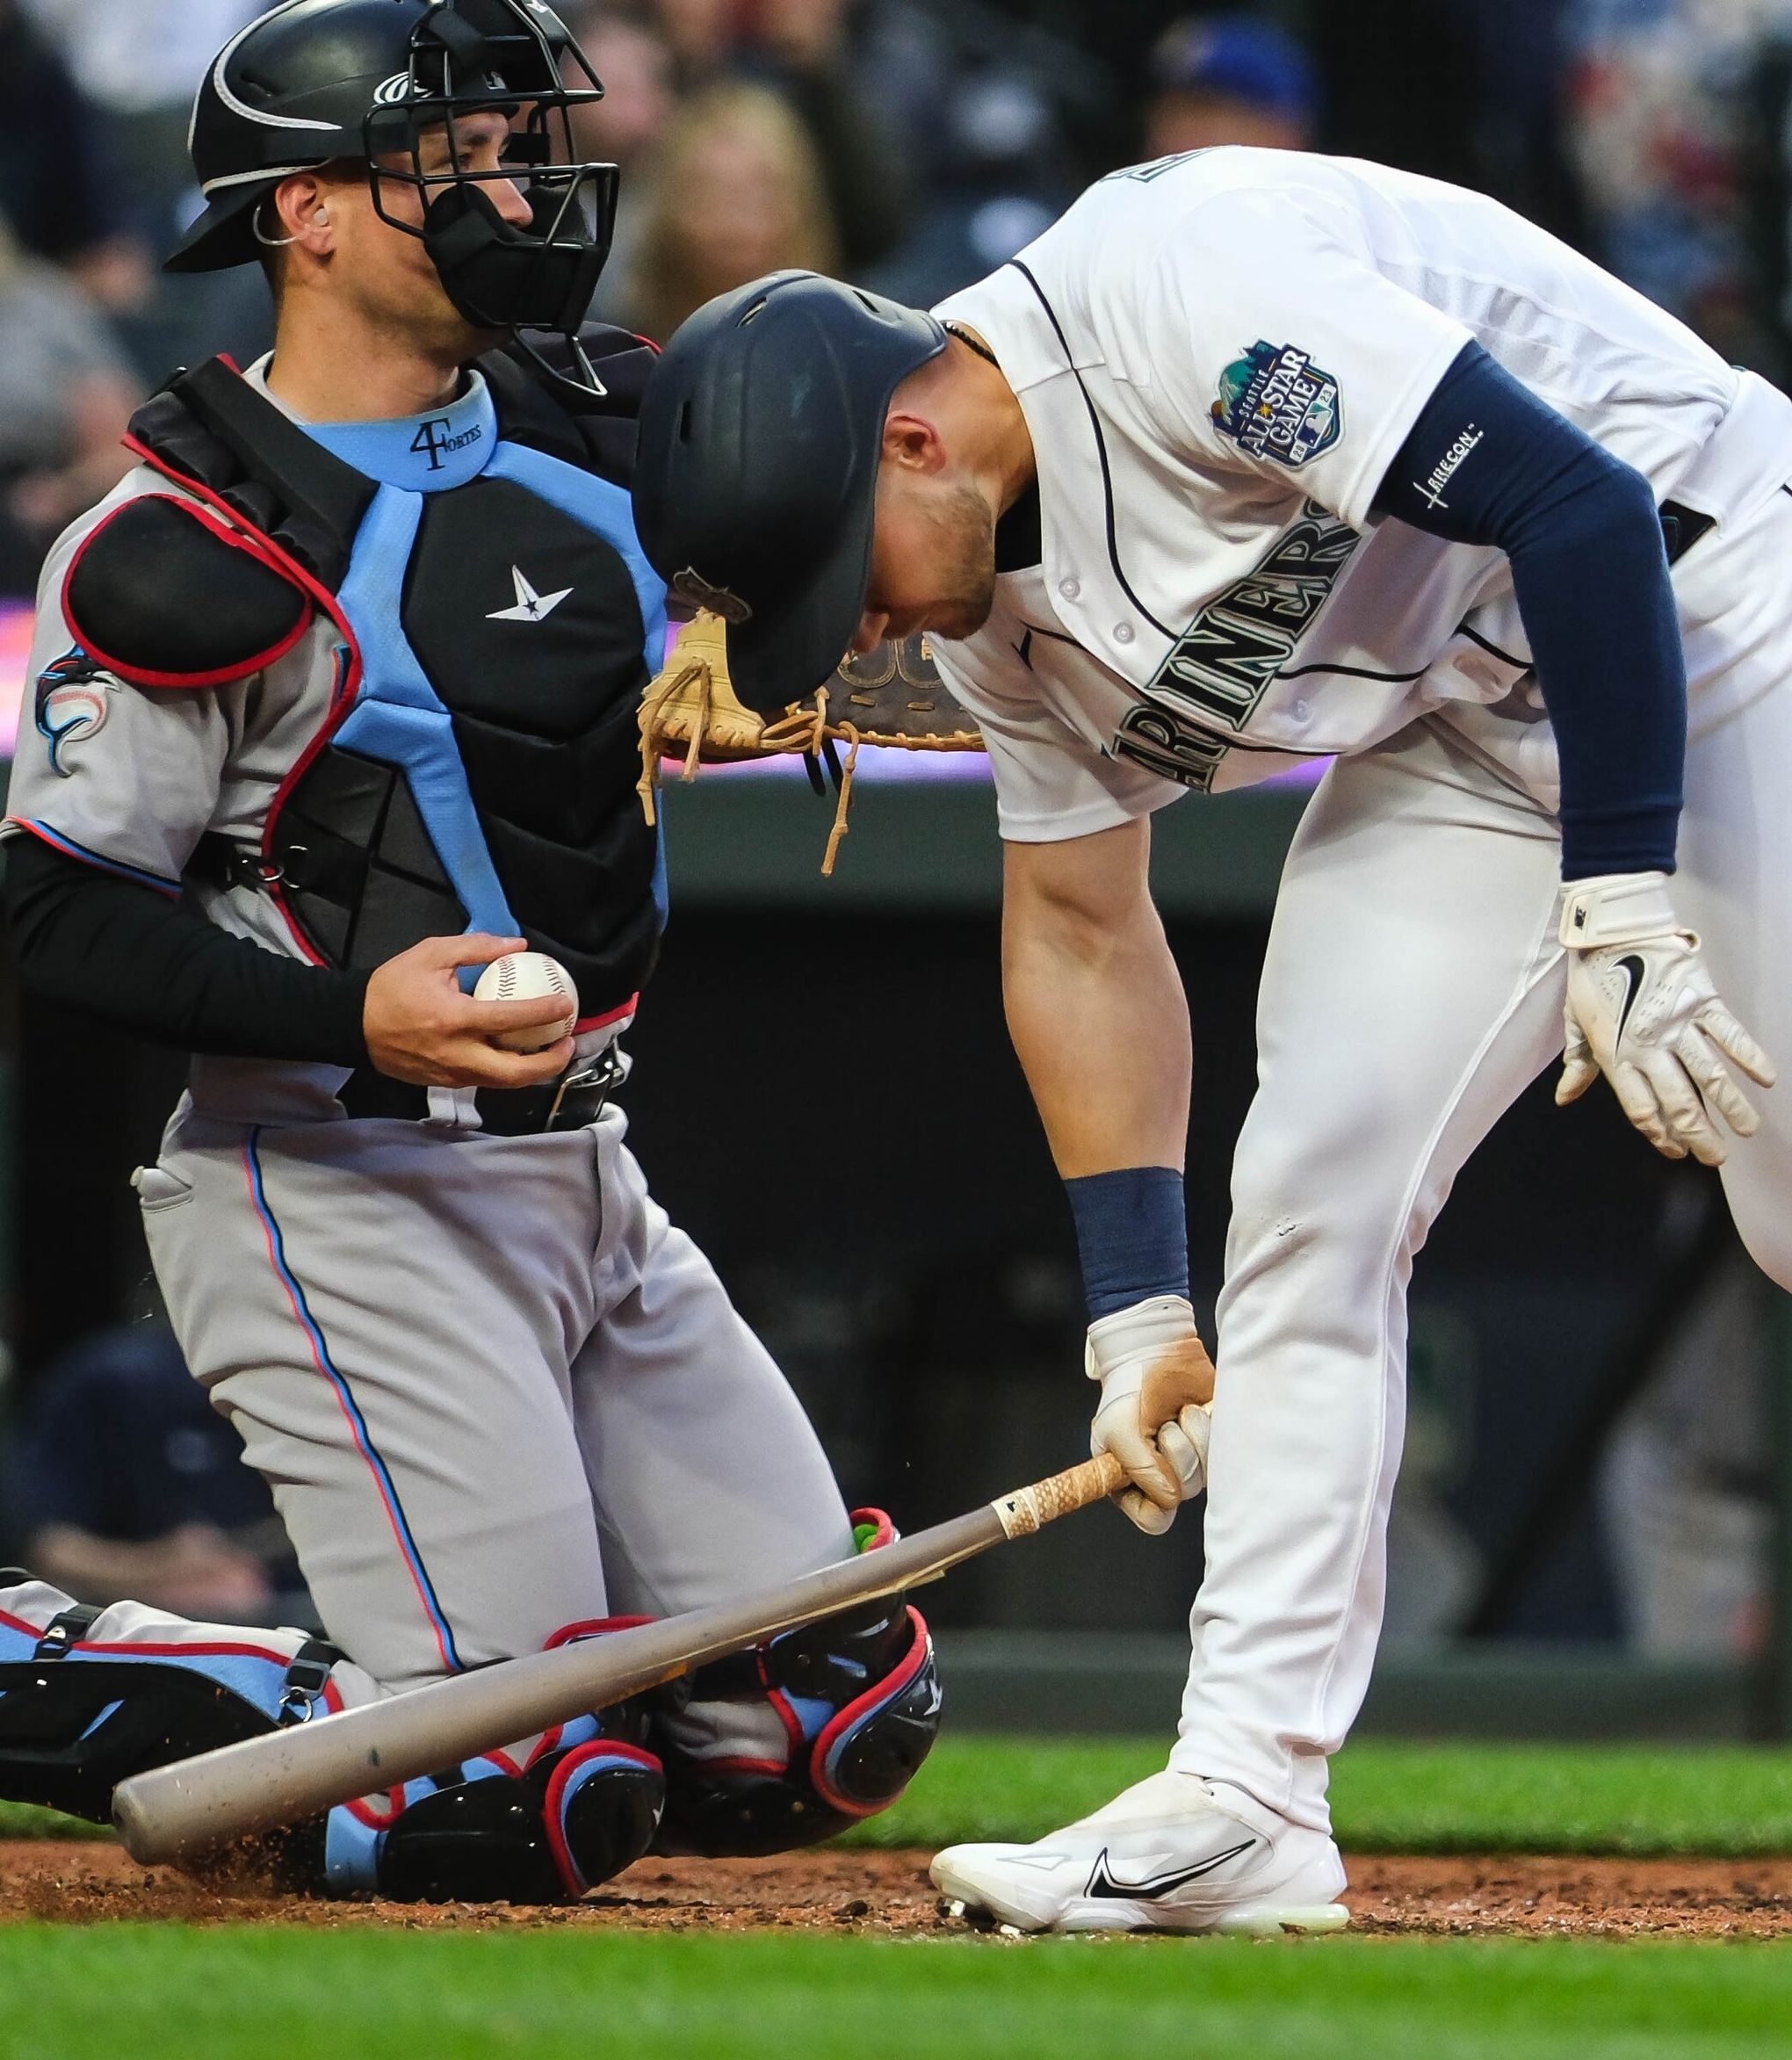 No reason to panic' after Mariners OF Jarred Kelenic's rocky debut